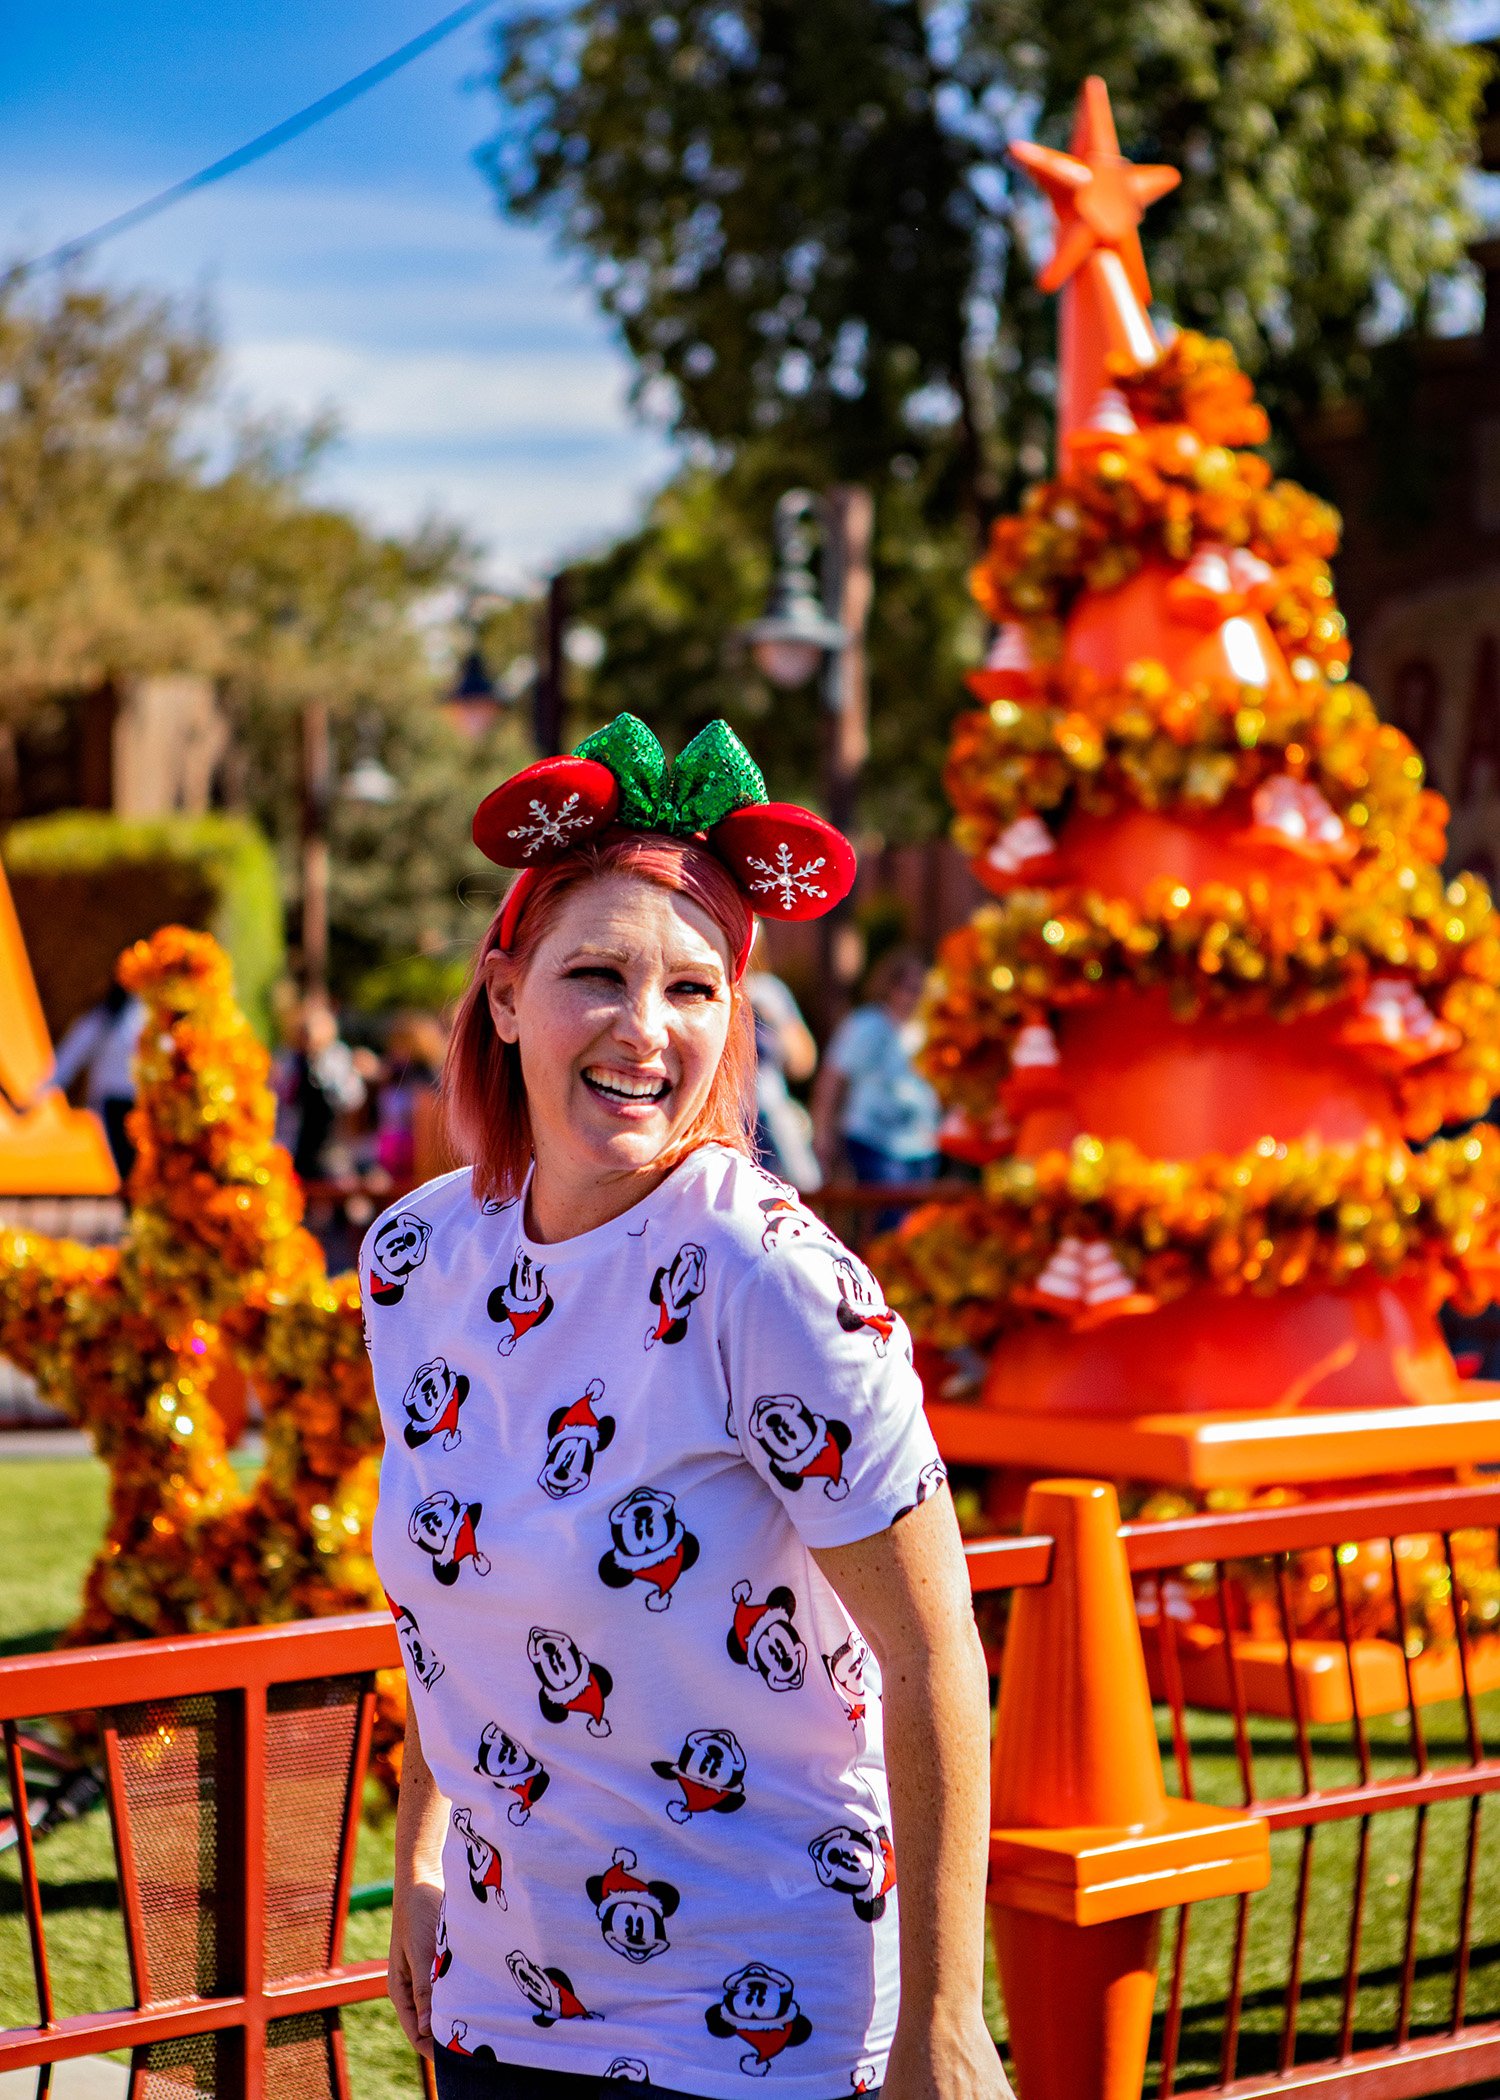 Gearing up for Disneyland Christmas? This is the ultimate guide to all entertainment, food and decor! A must read before your trip!